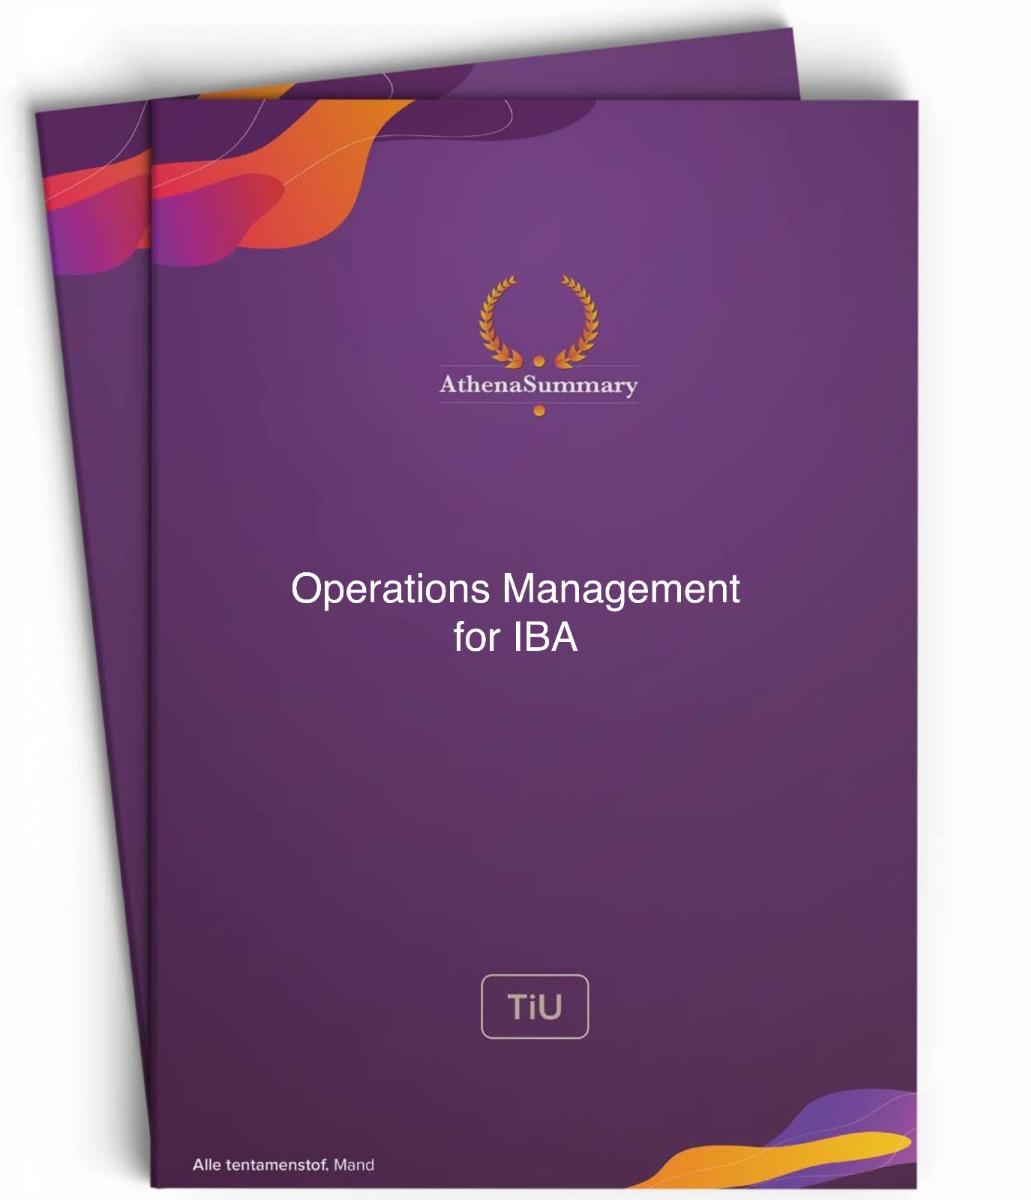 Literature and Lecture Summary: Operations Management for IBA